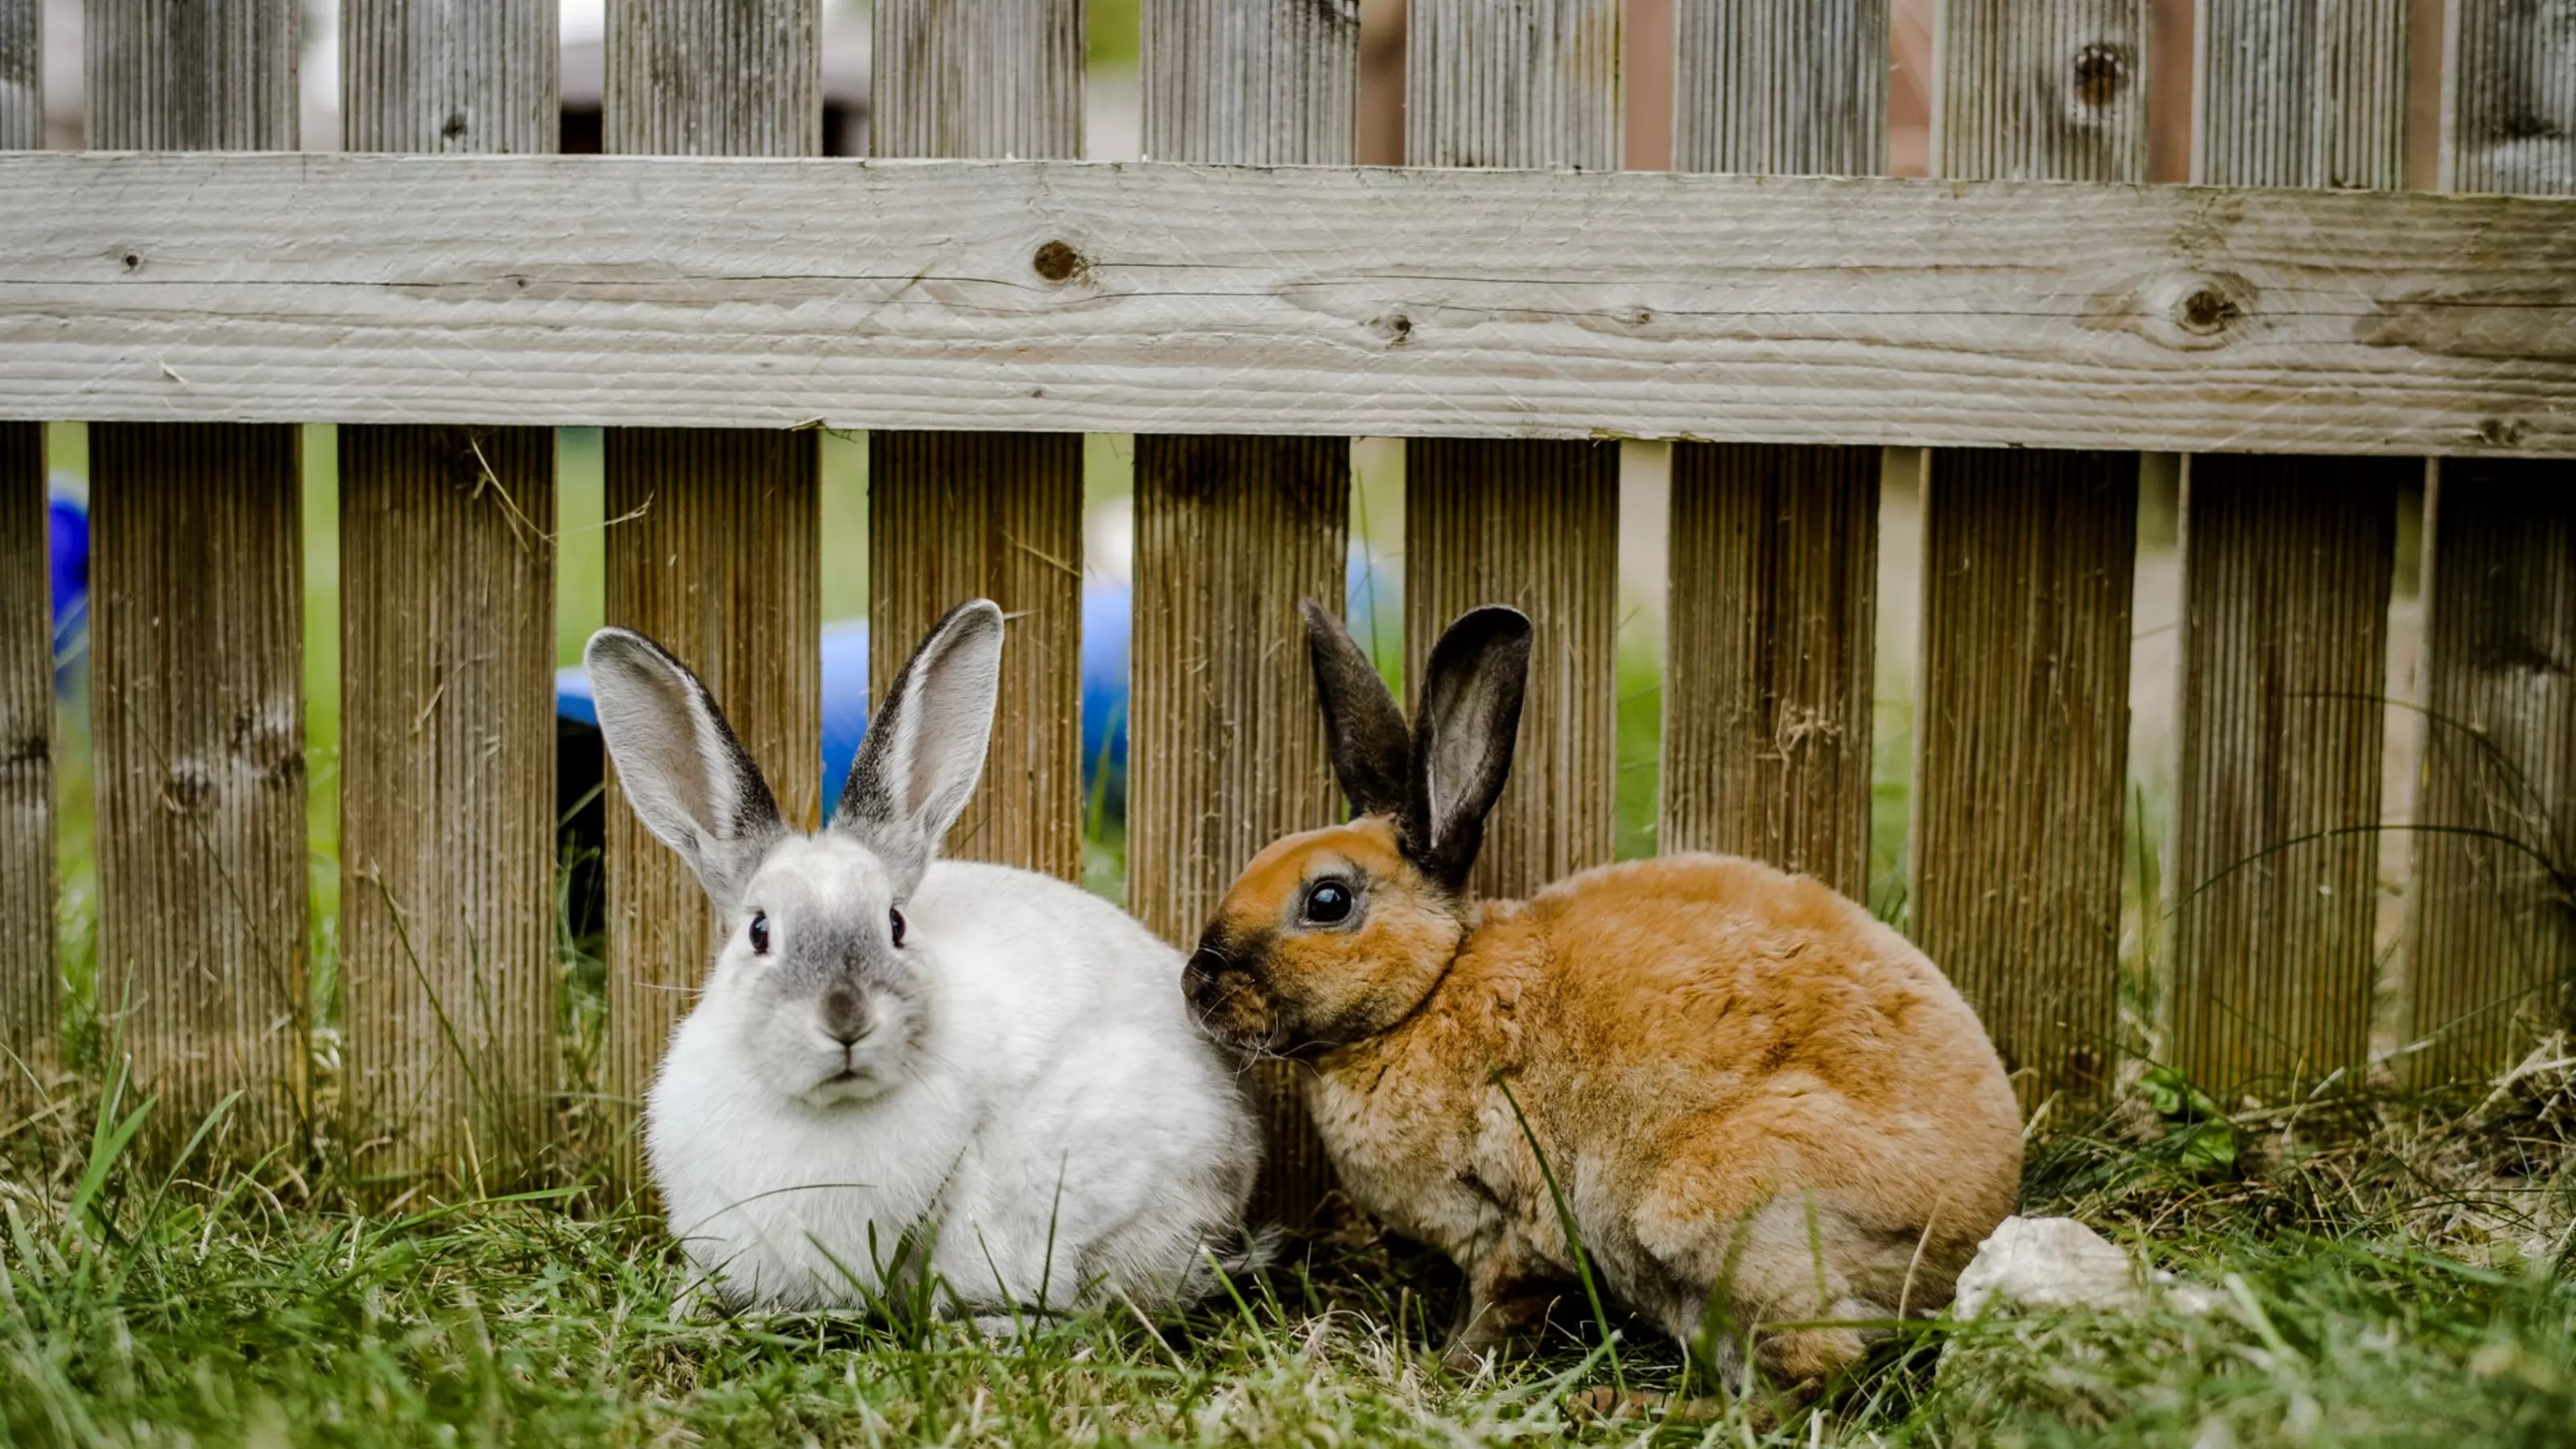 One white rabbit and one brown rabbit on the grass in a fenced off run